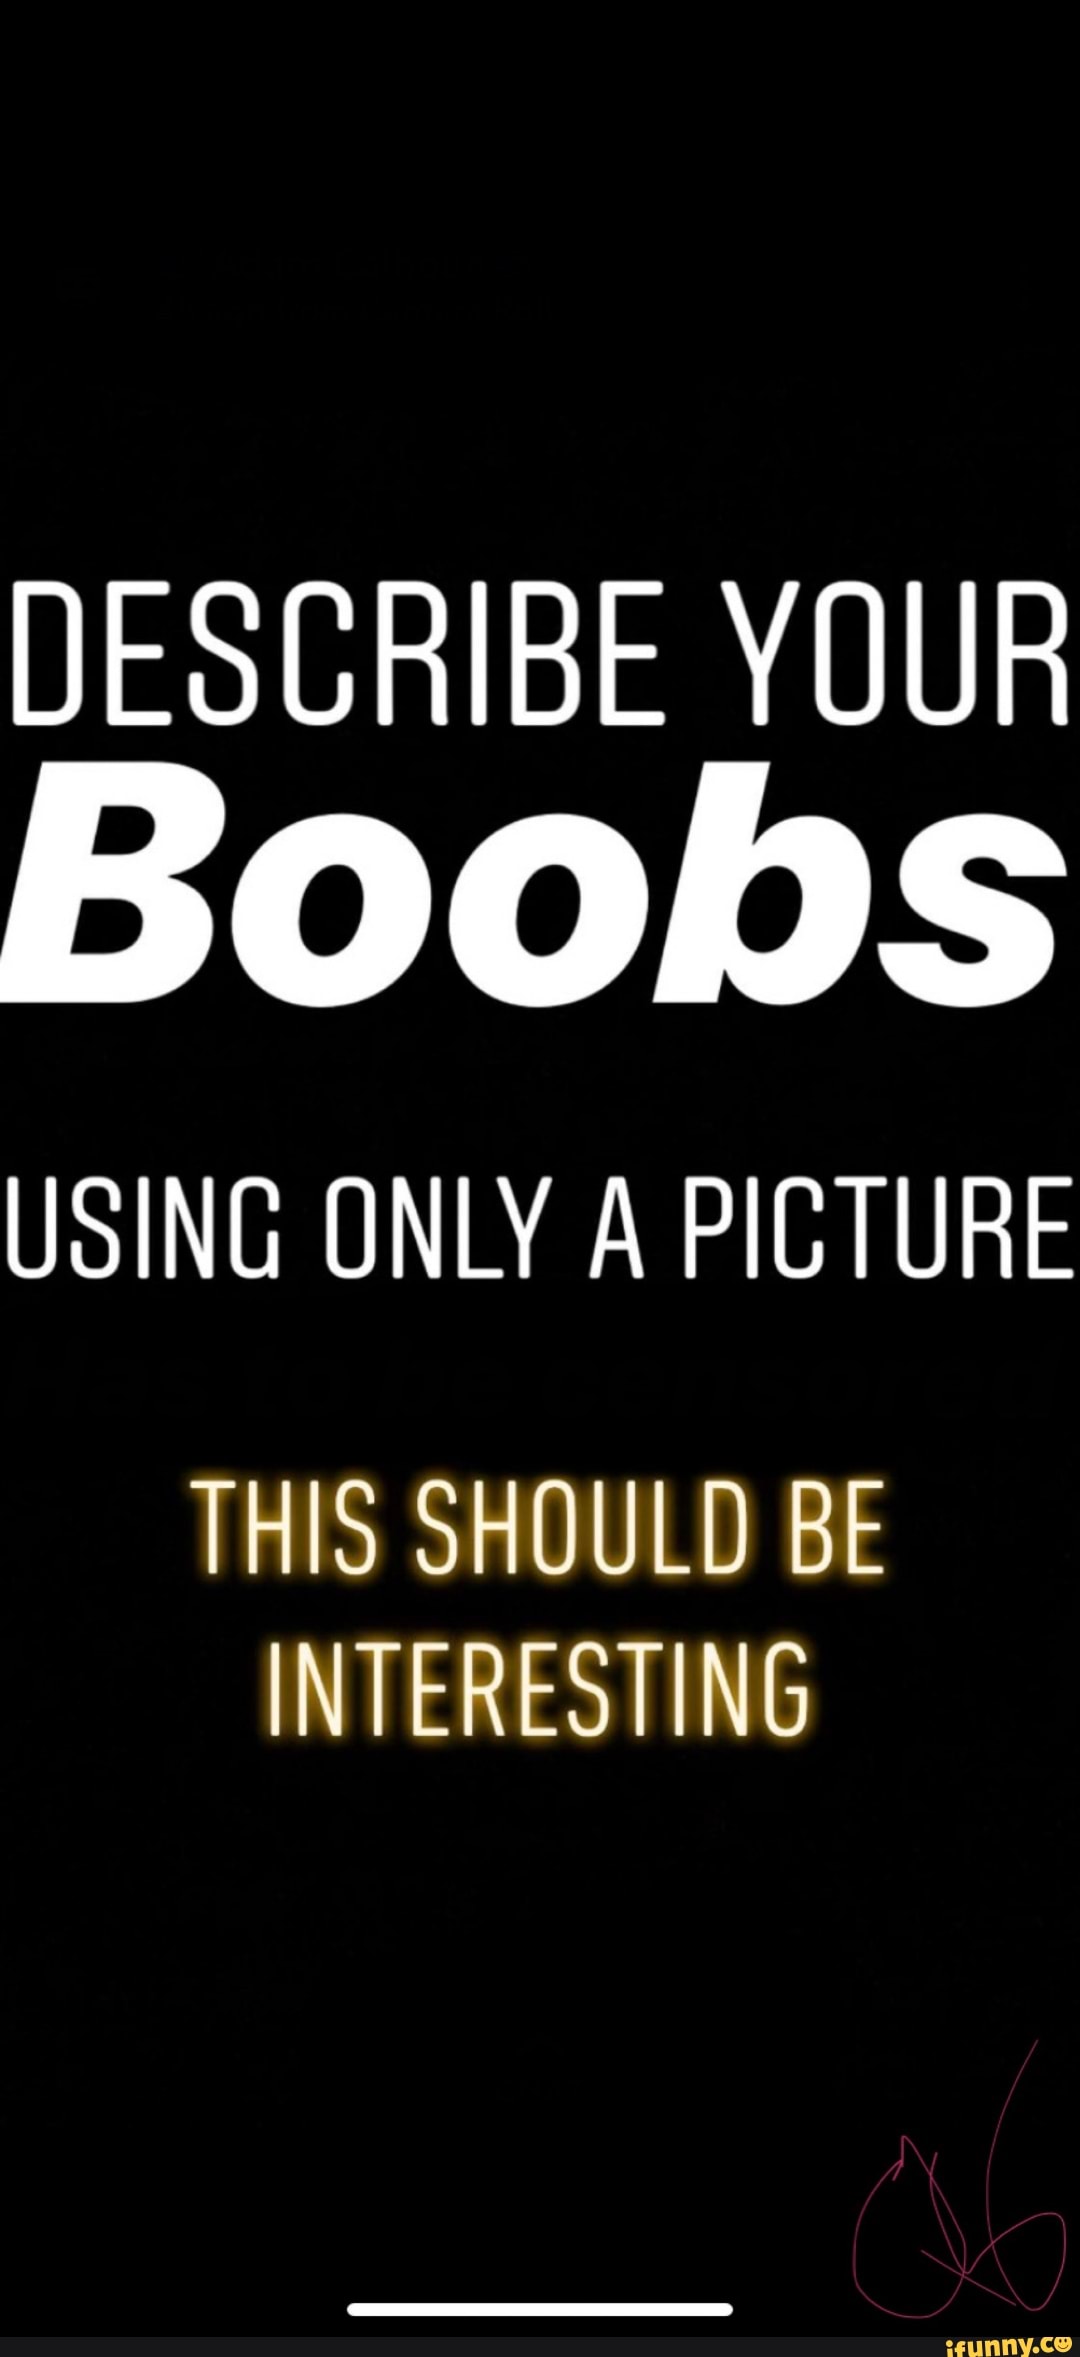 How to draw boobs, an in-depth guide - iFunny Brazil